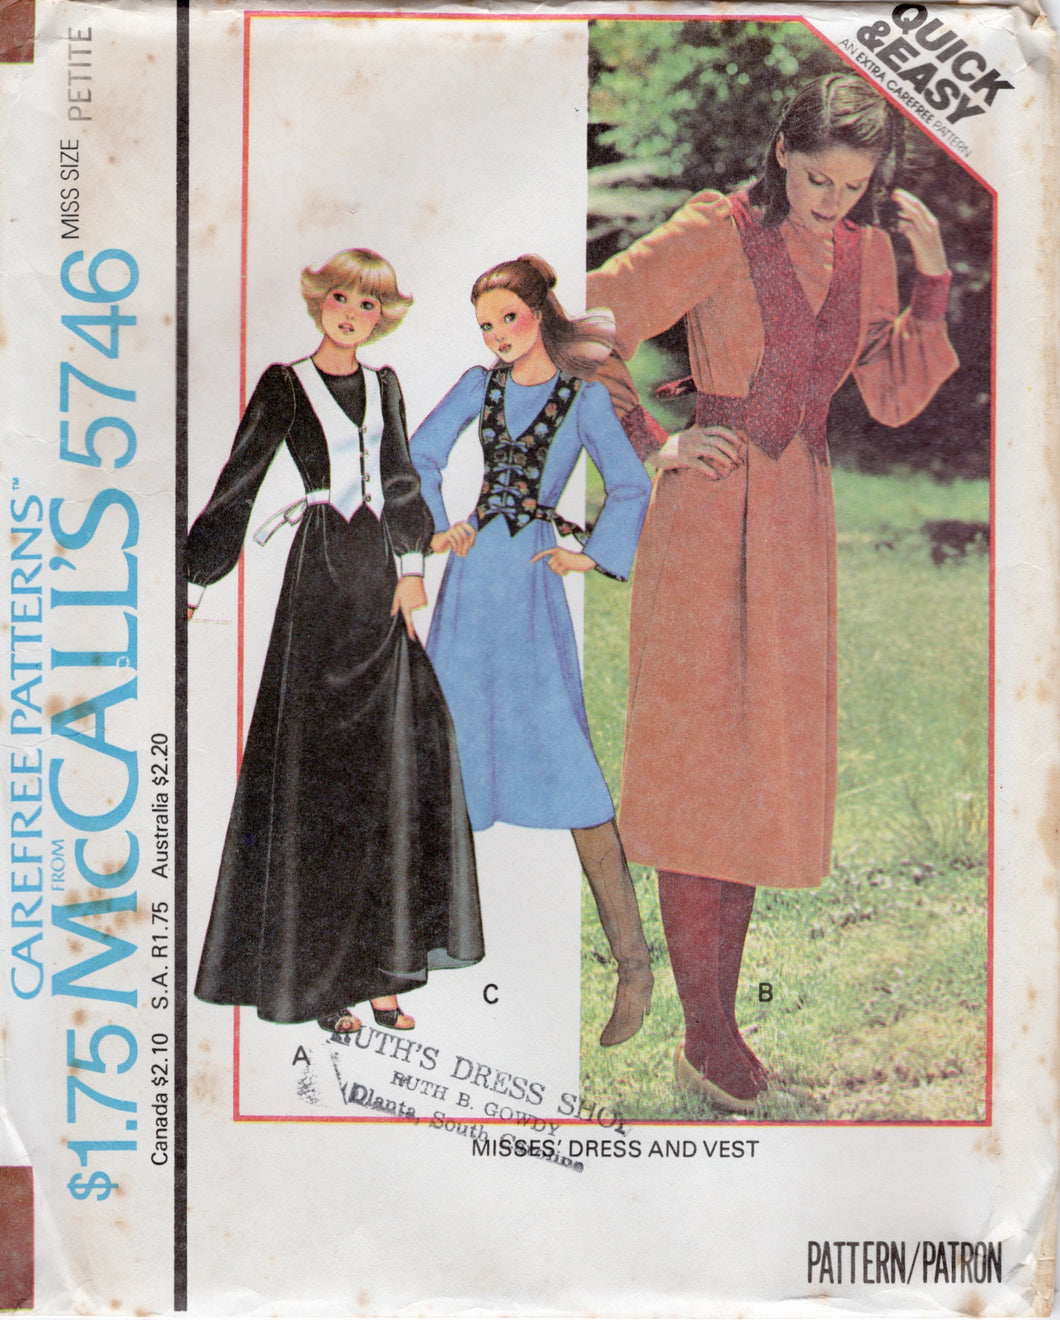 1970's McCall's One Piece Dress and Vest Pattern - Bust 30.5-31.5